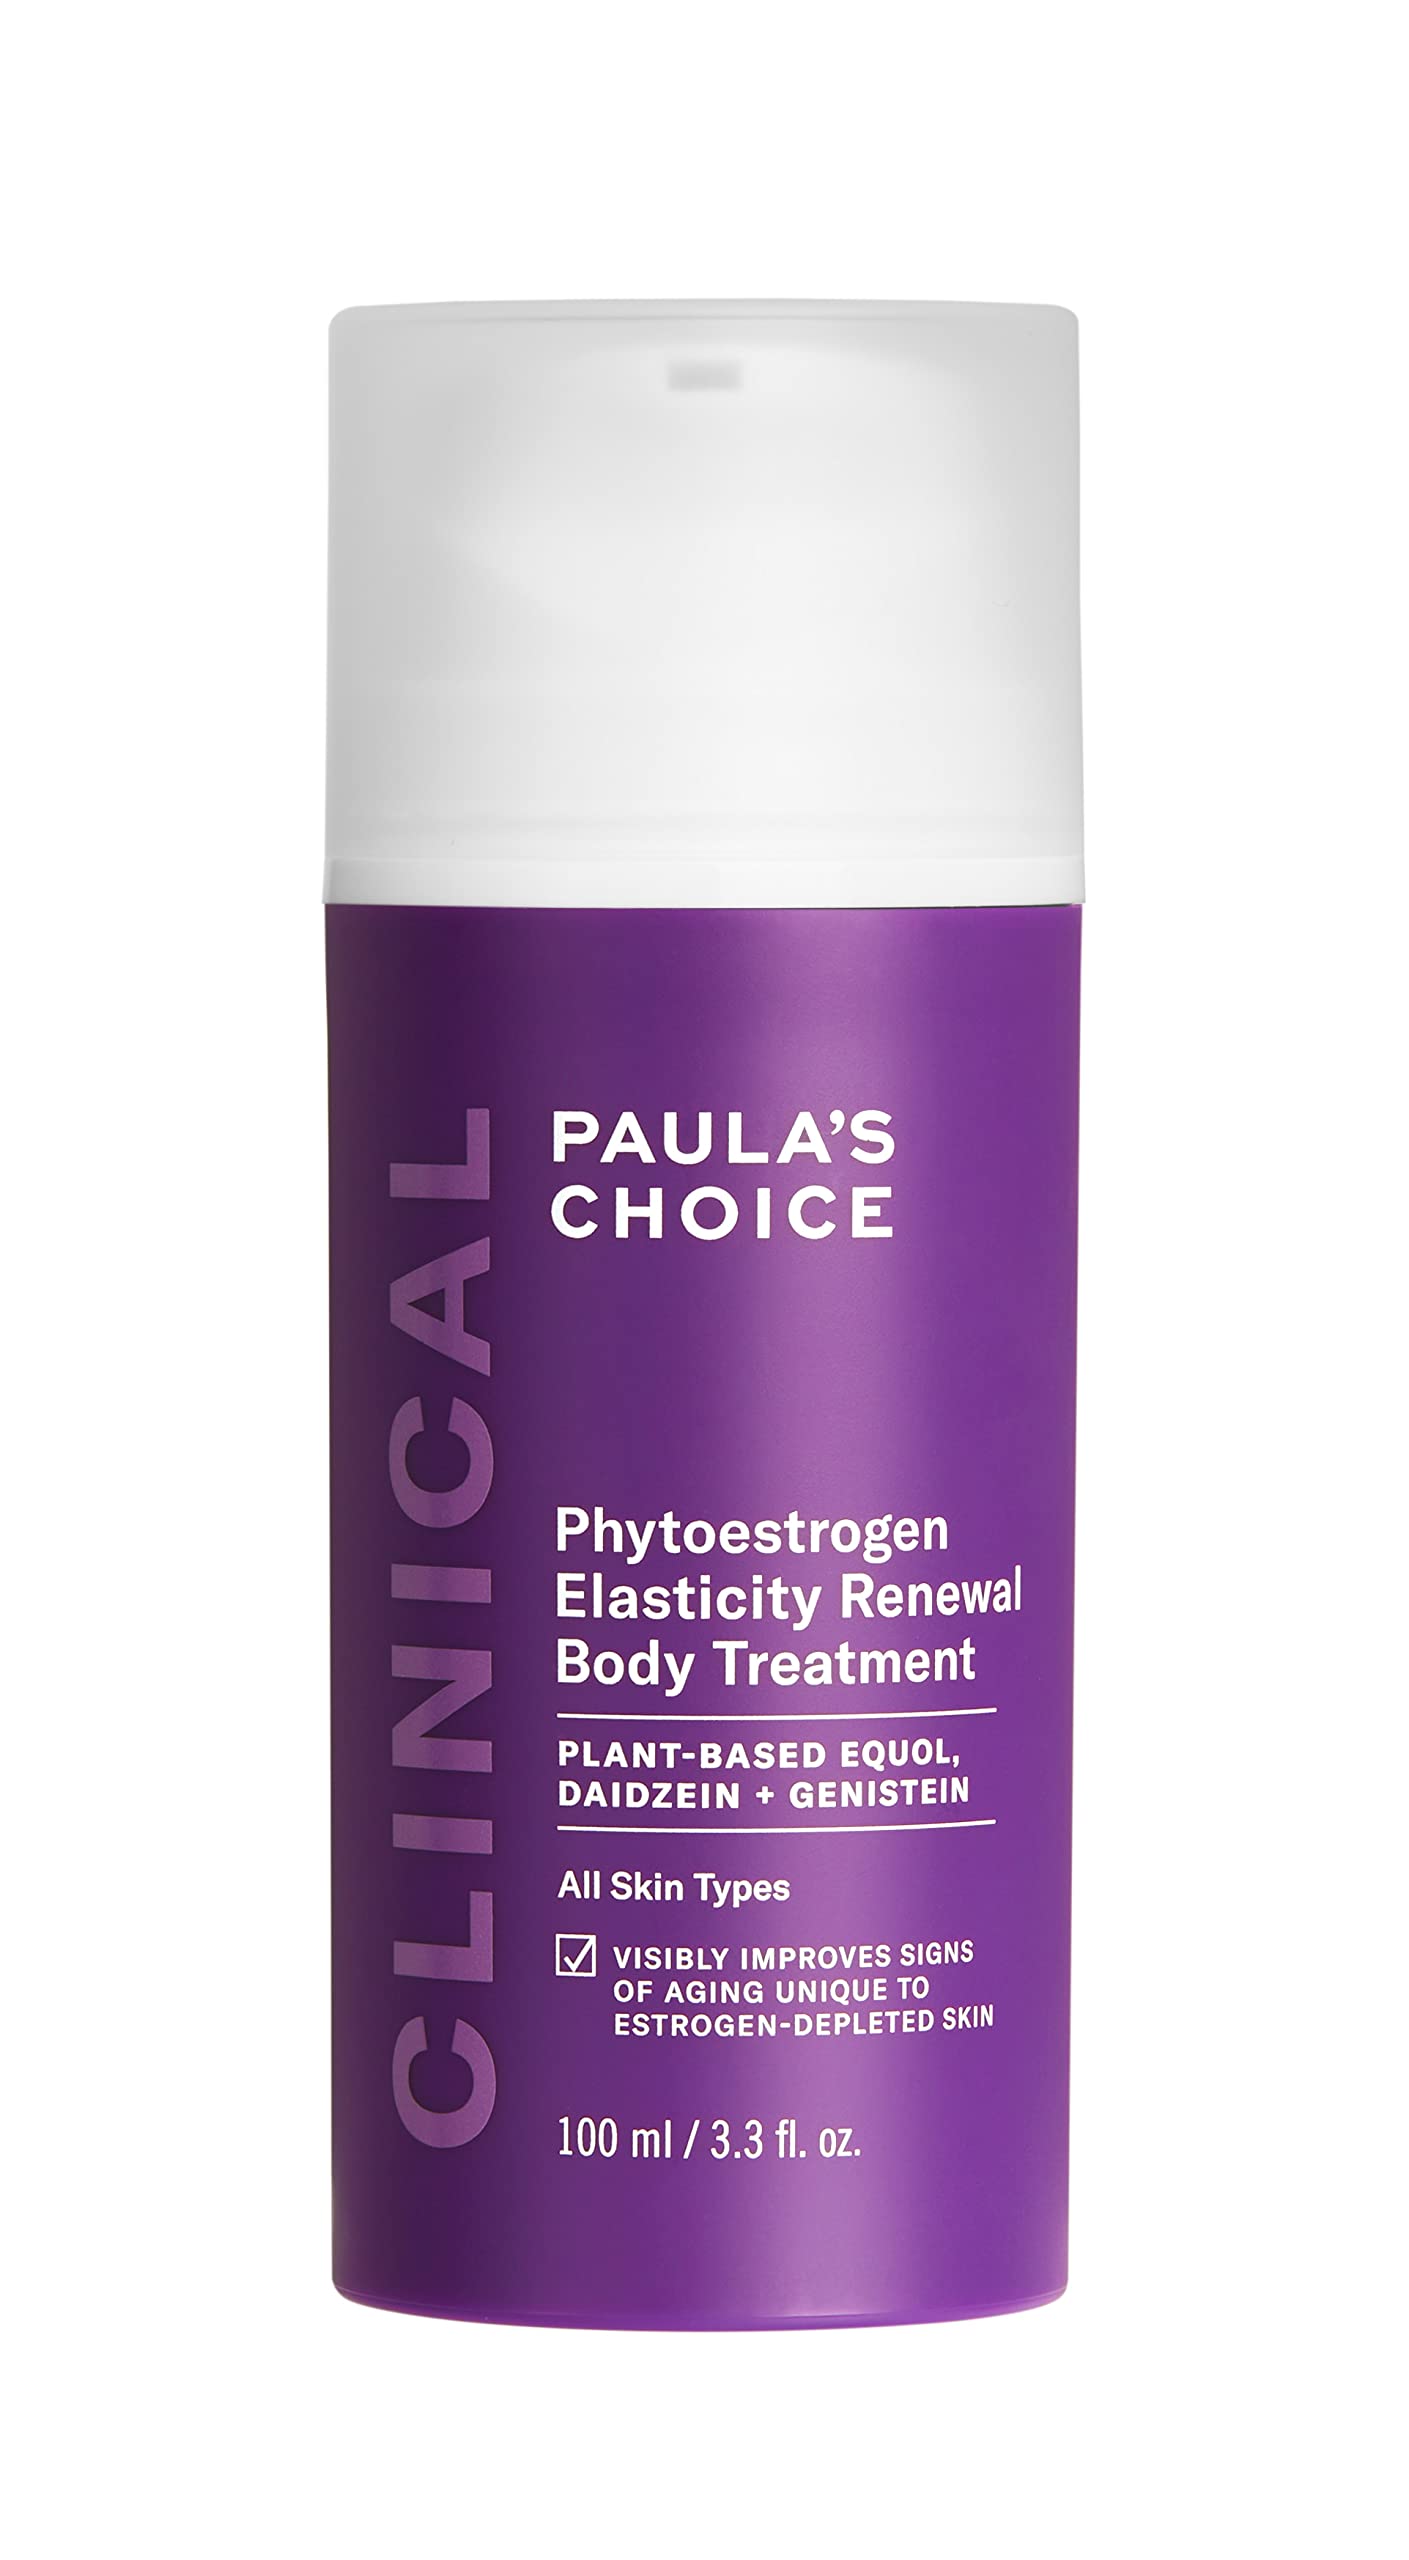 Paula's Choice CLINICAL Phytoestrogen Elasticity Renewal Body Treatment, Restores Loose, Thinning & Crepey-looking Skin Due to Estrogen Loss, Chest & Decollete Cream, Fragrance-Free, 3.3 Fl Oz